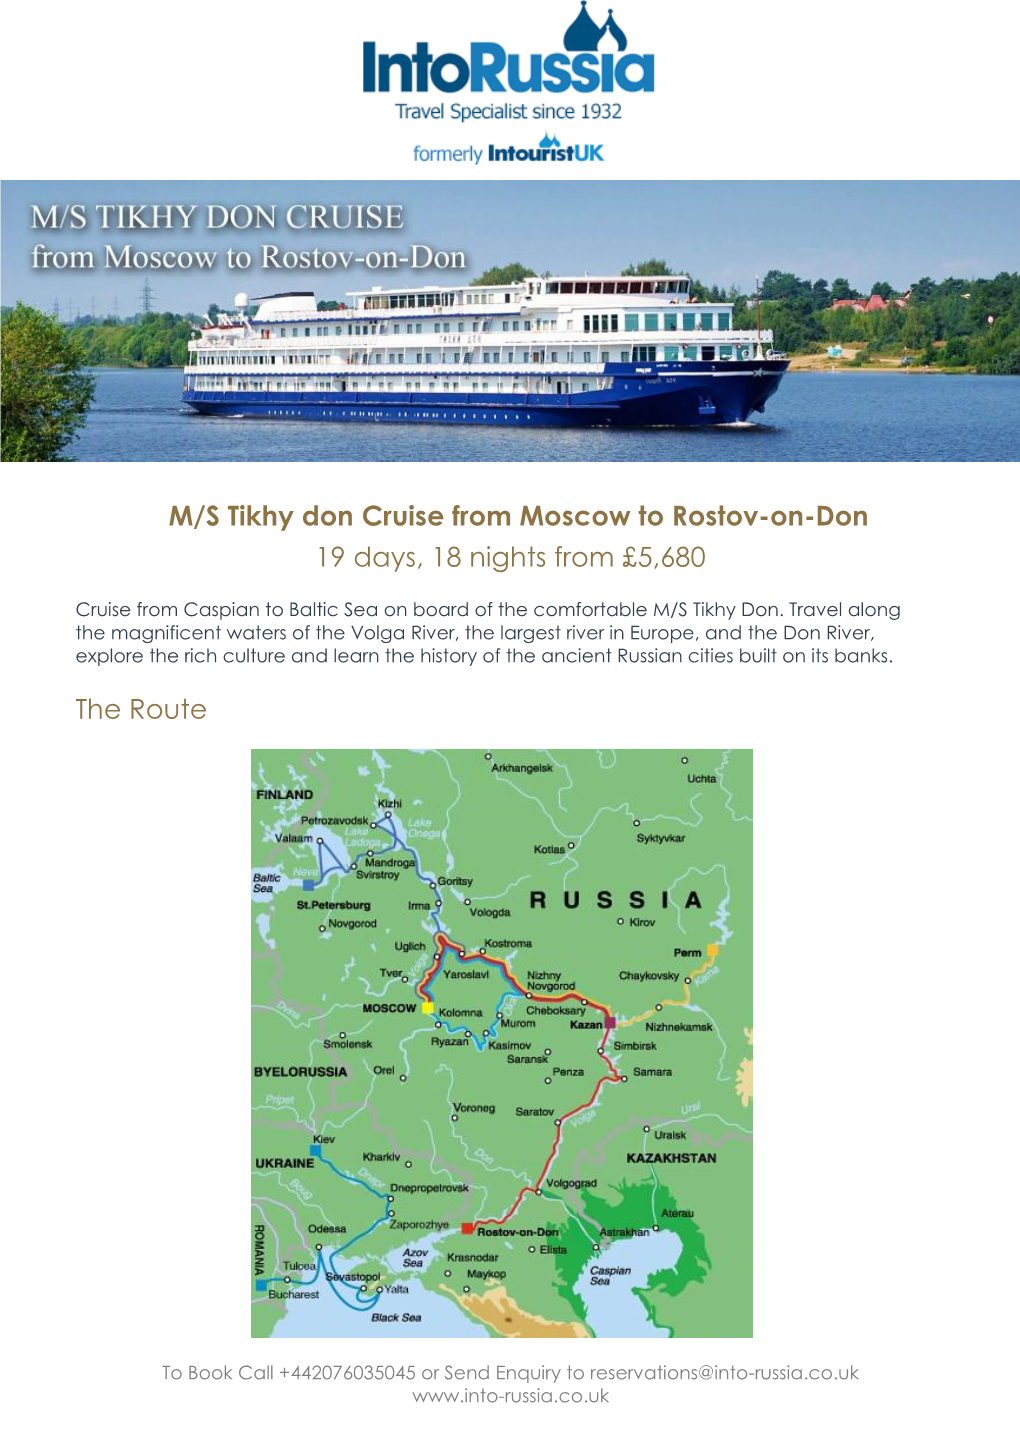 M/S Tikhy Don Cruise from Moscow to Rostov-On-Don 19 Days, 18 Nights from £5,680